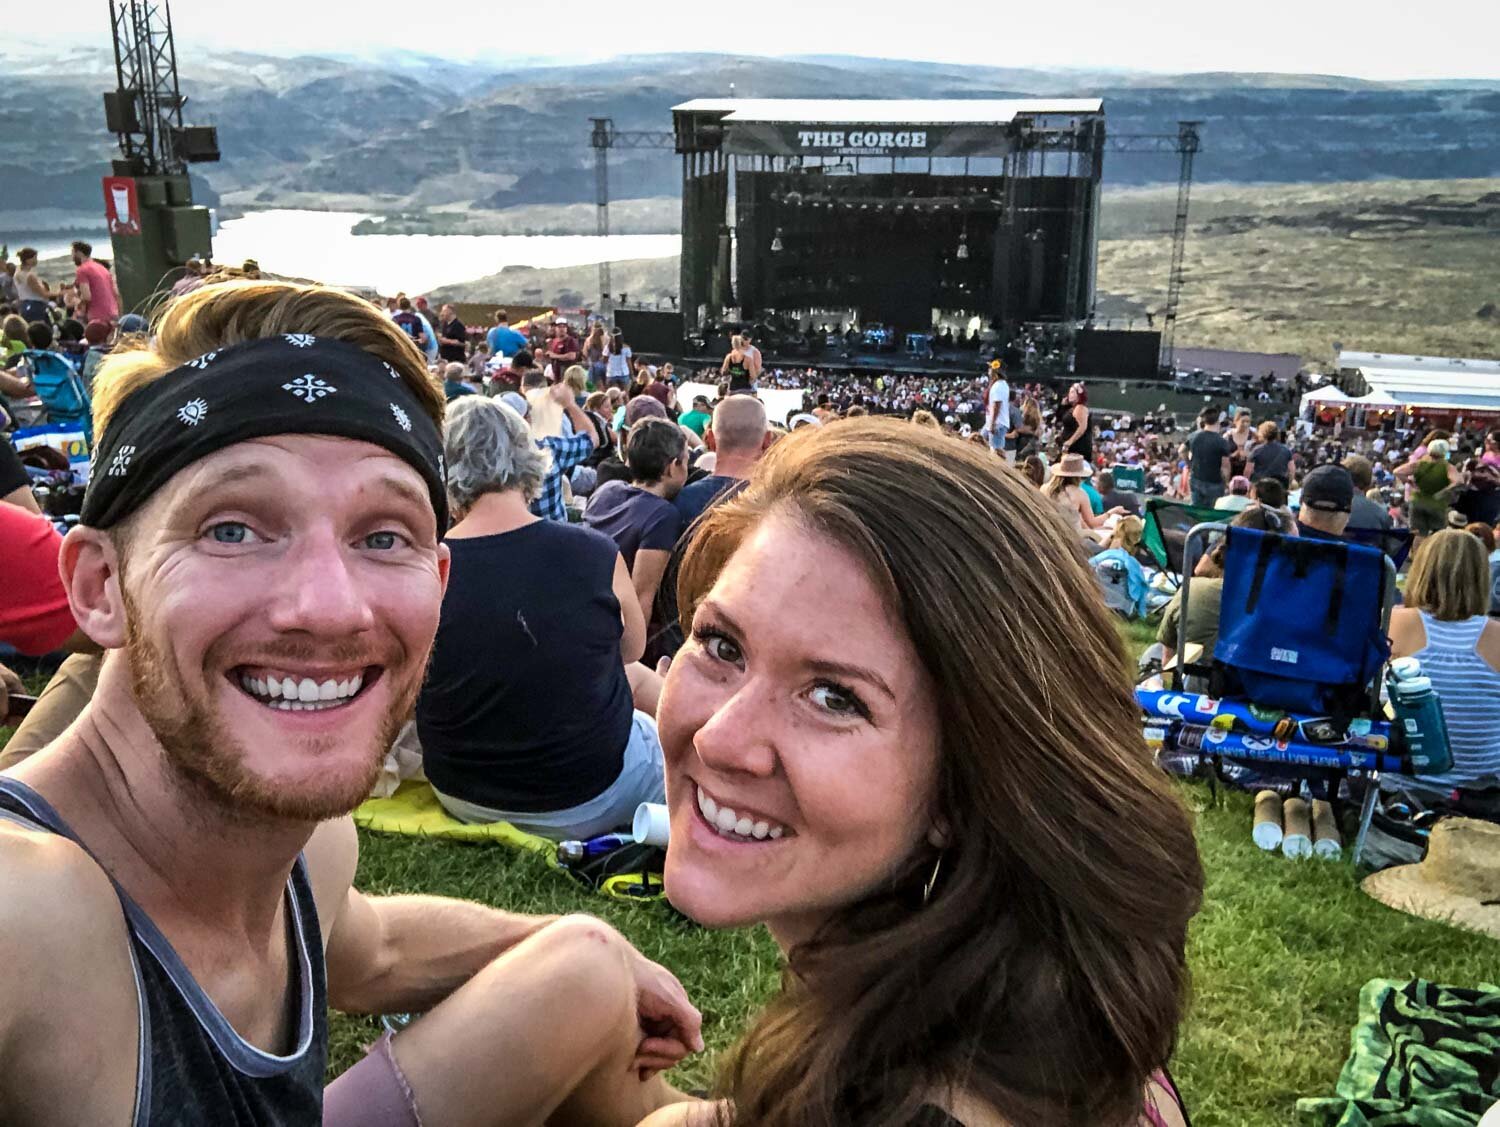 Things to do in Washington State the Gorge DMB concert